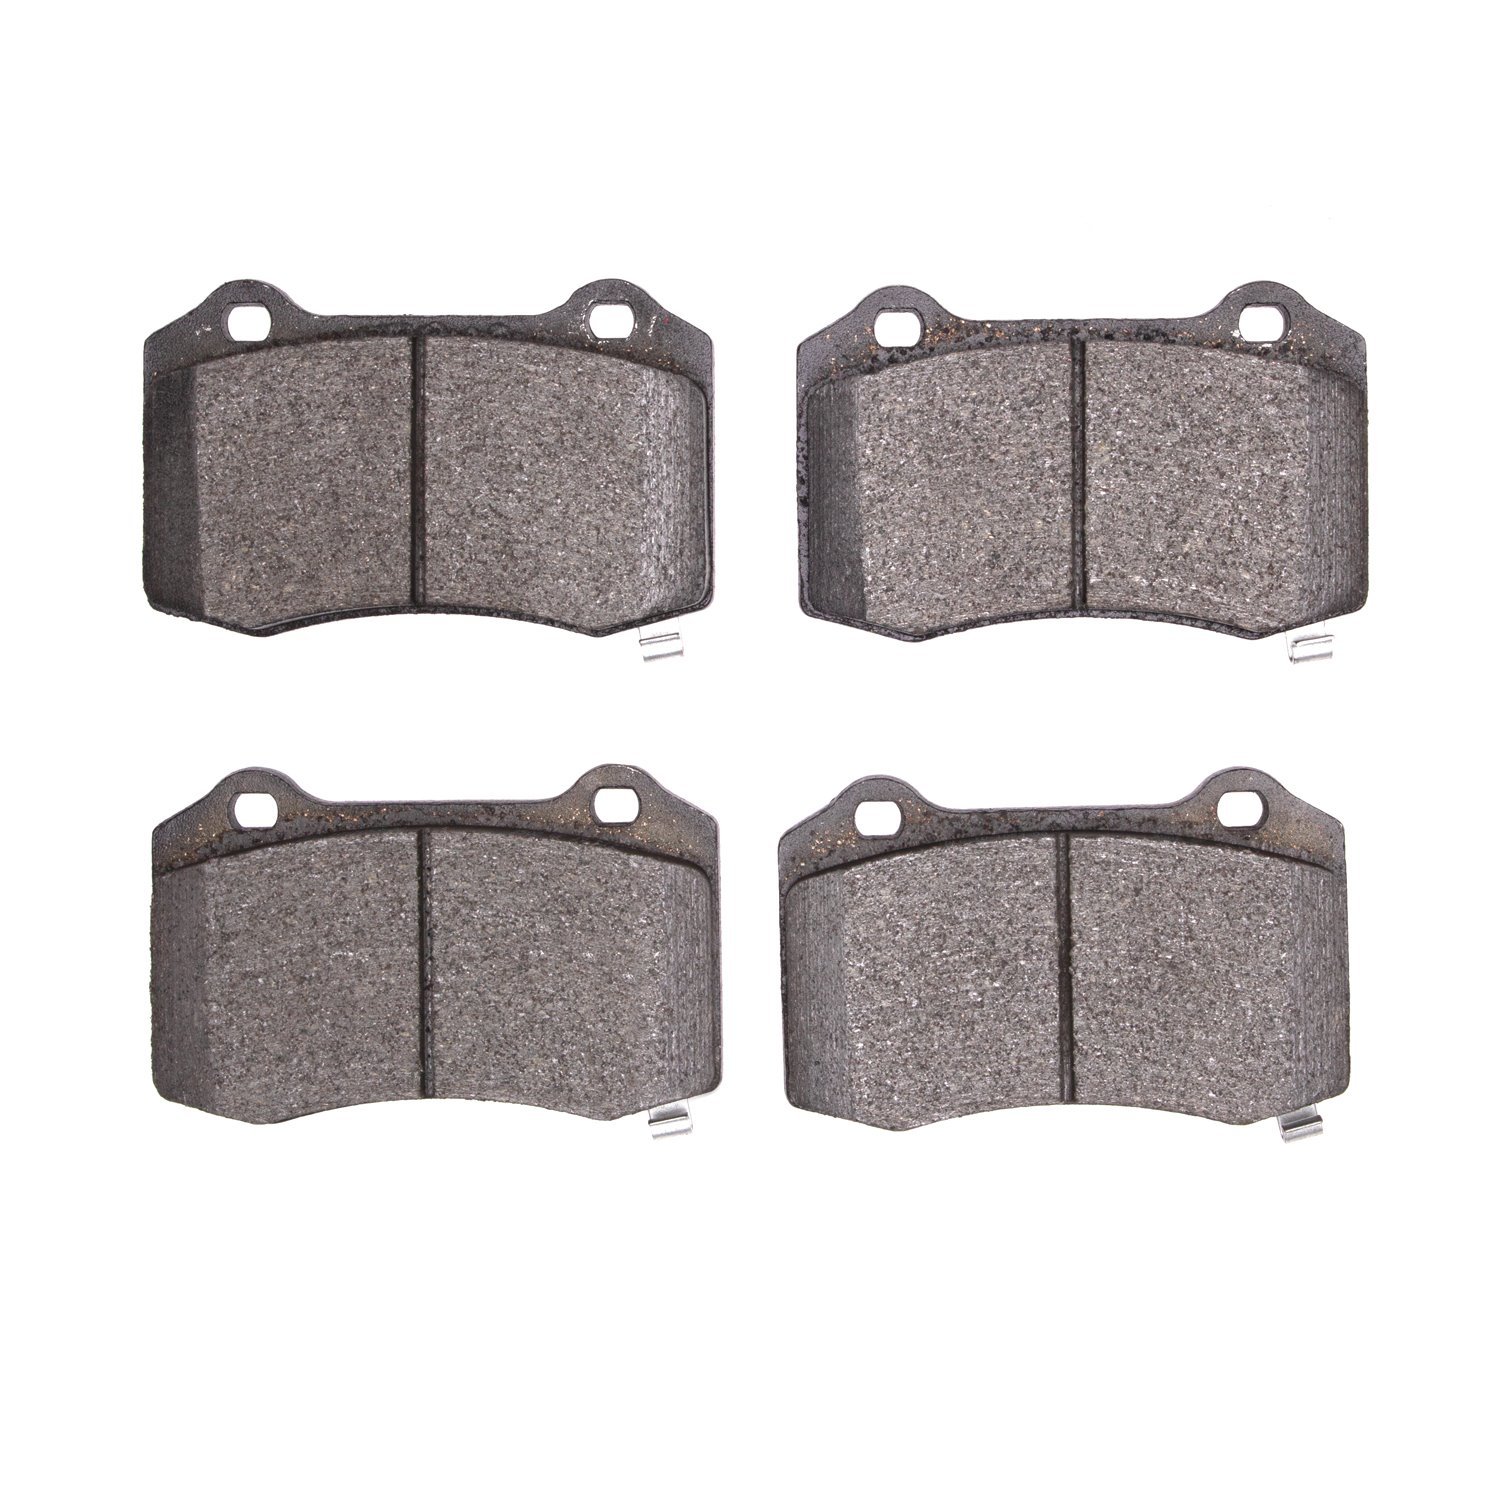 Euro Ceramic Brake Pads, Fits Select Fits Multiple Makes/Models, Position: Rear